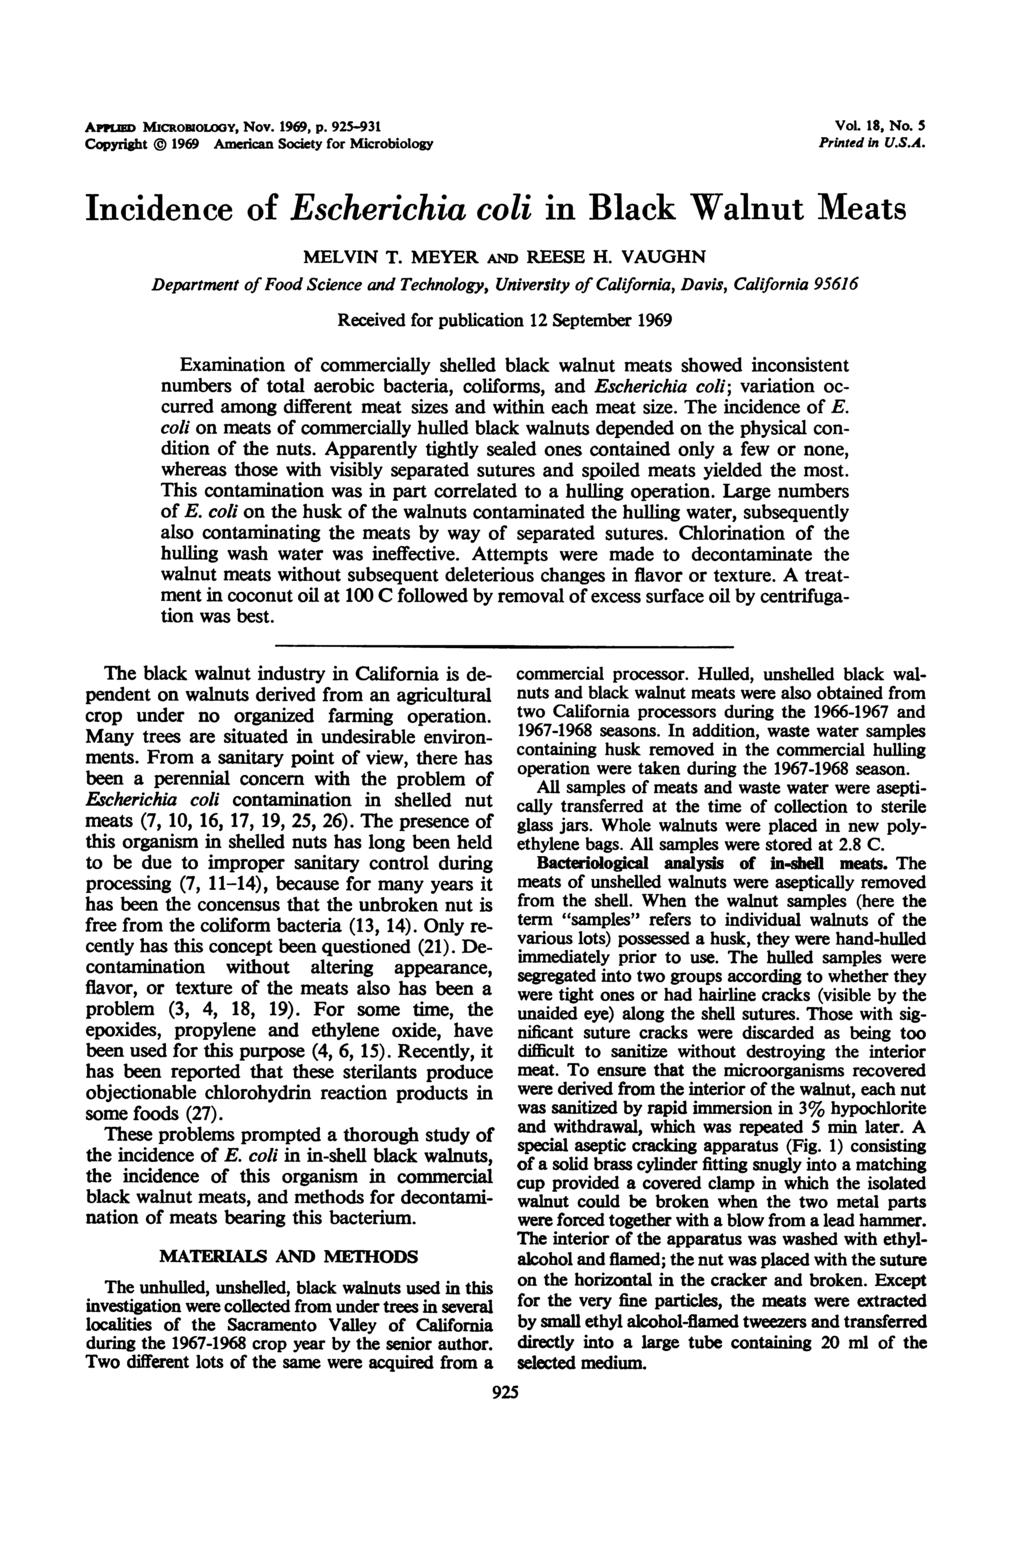 AmLD MicRomnowoy, Nov. 1969, p. 925-931 Copyright 1969 American Society for Microbiology VoL 18, No. 5 Printed in U.S.A. Incidence of Escherichia coli in Black Walnut Meats MELVIN T.